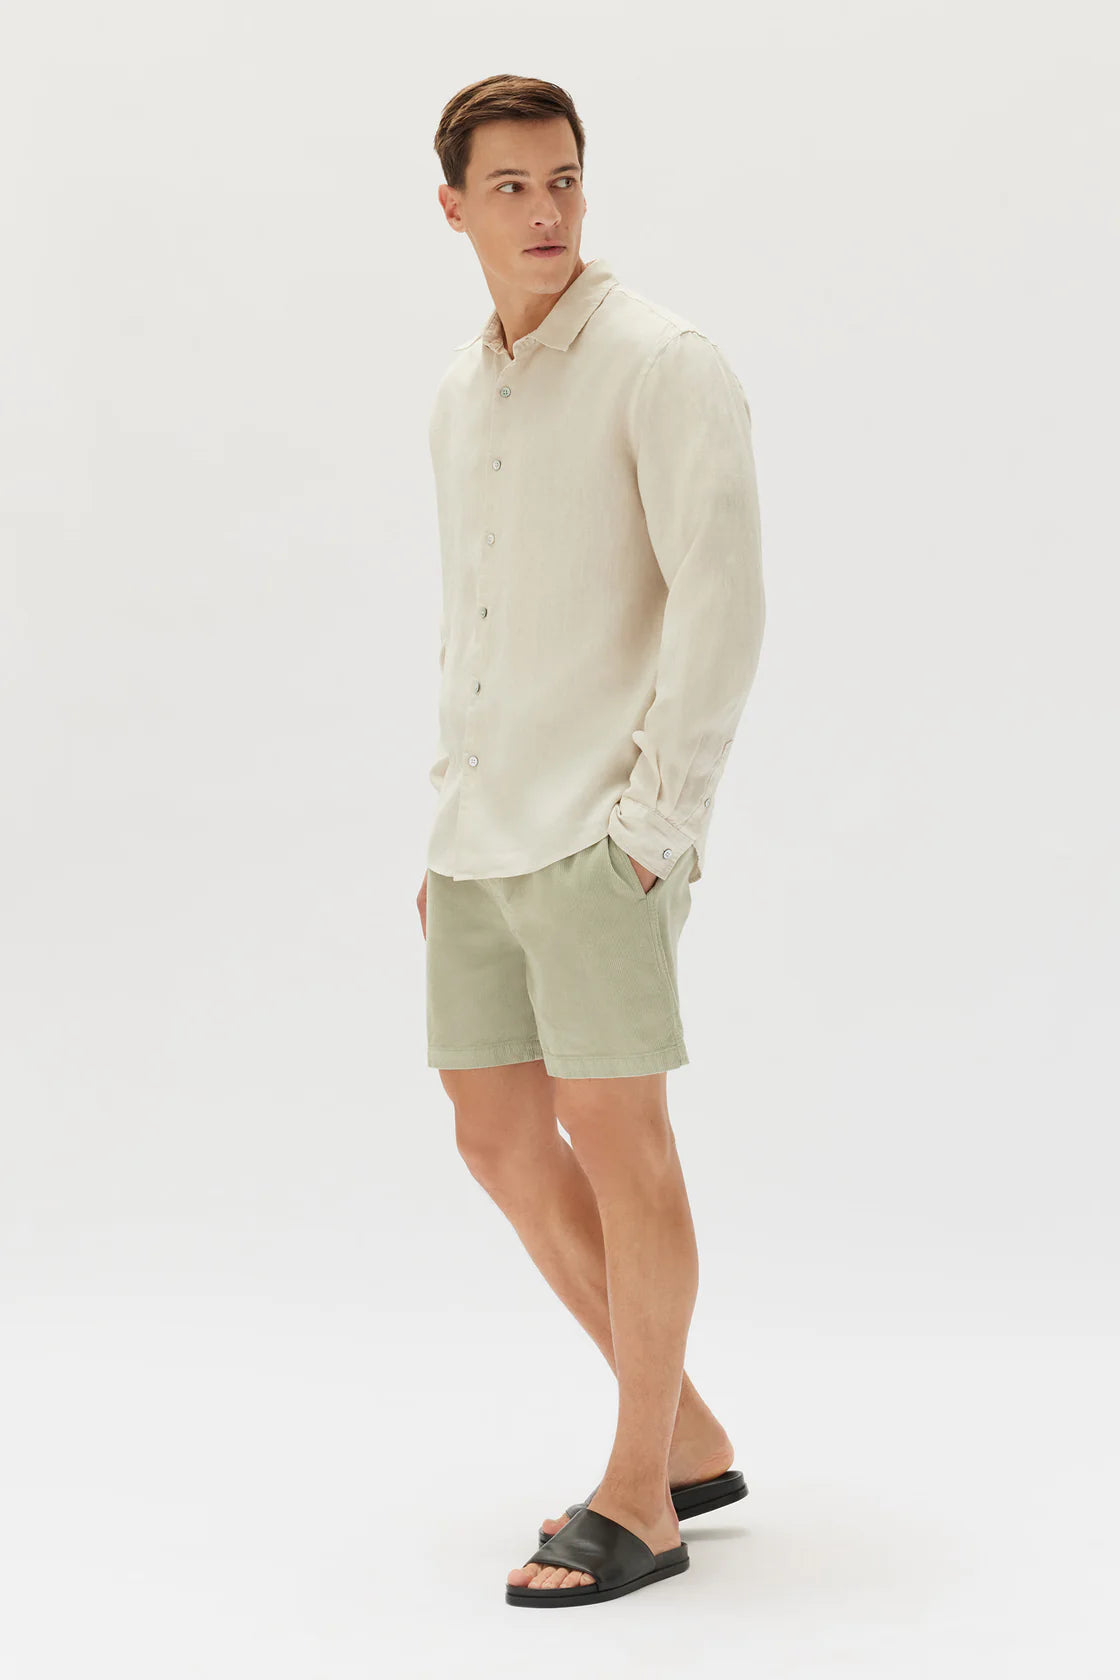 Assembly Label | Casual Long Sleeve Shirt - Stone